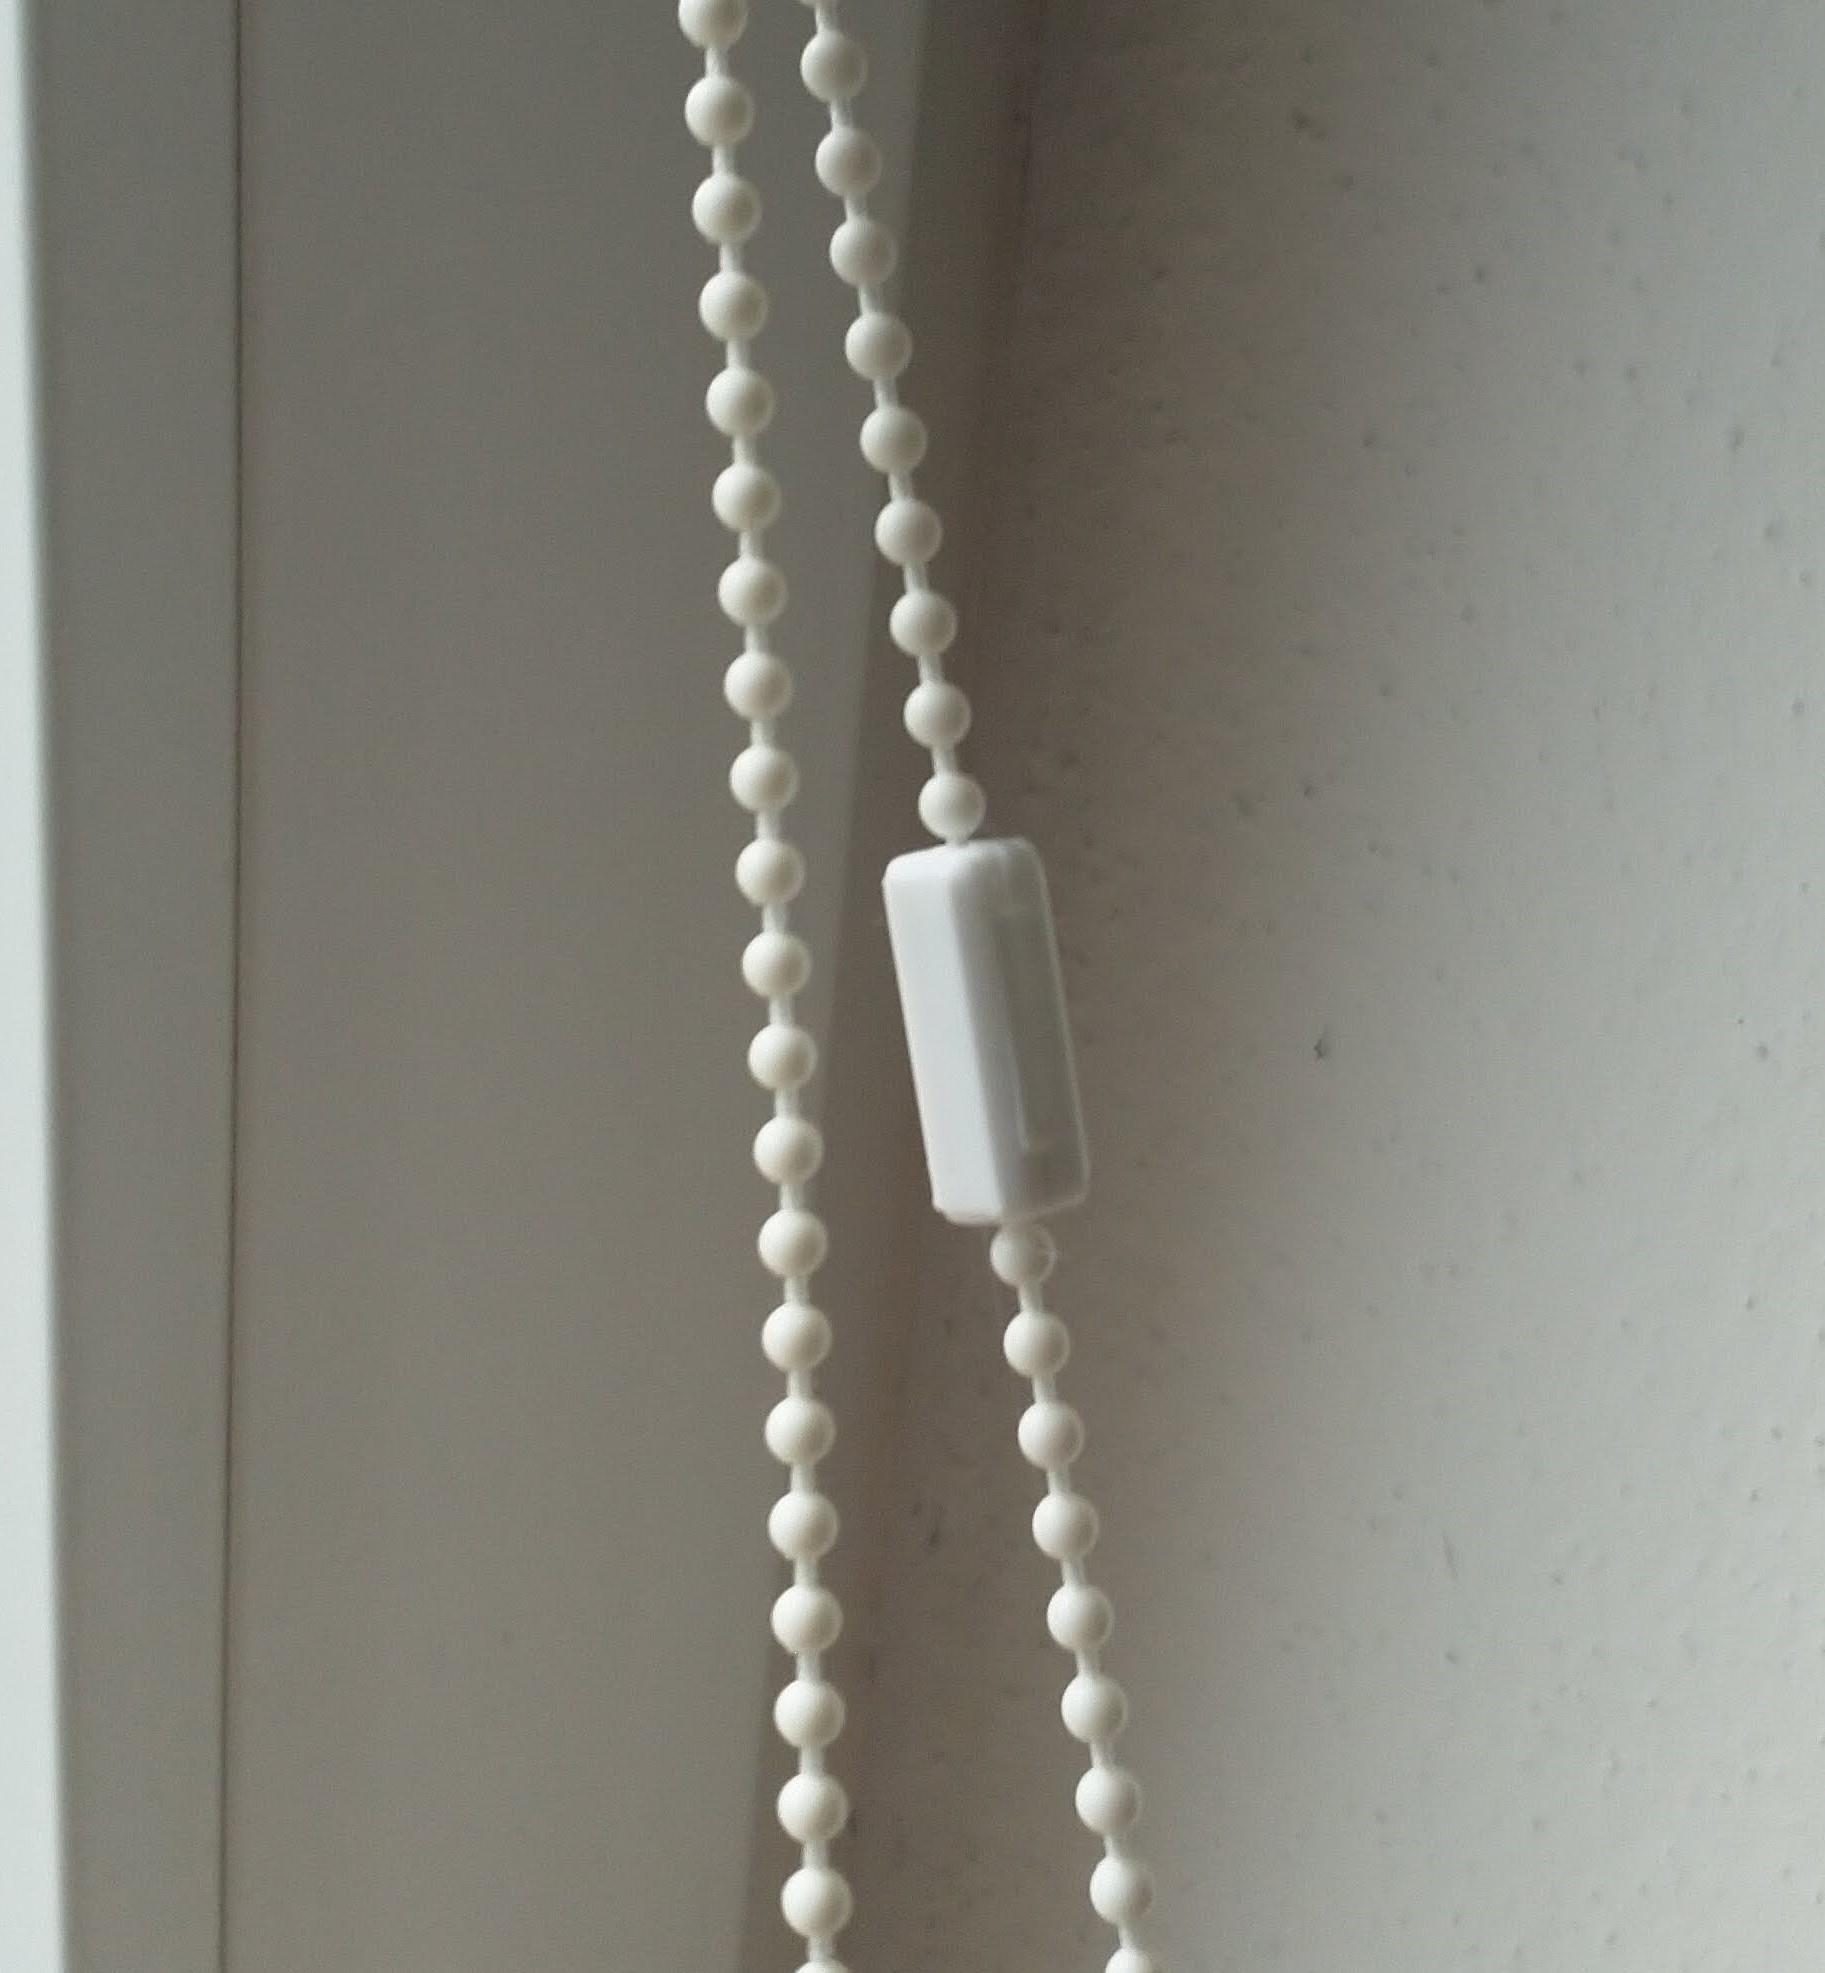 Blinds cord connector